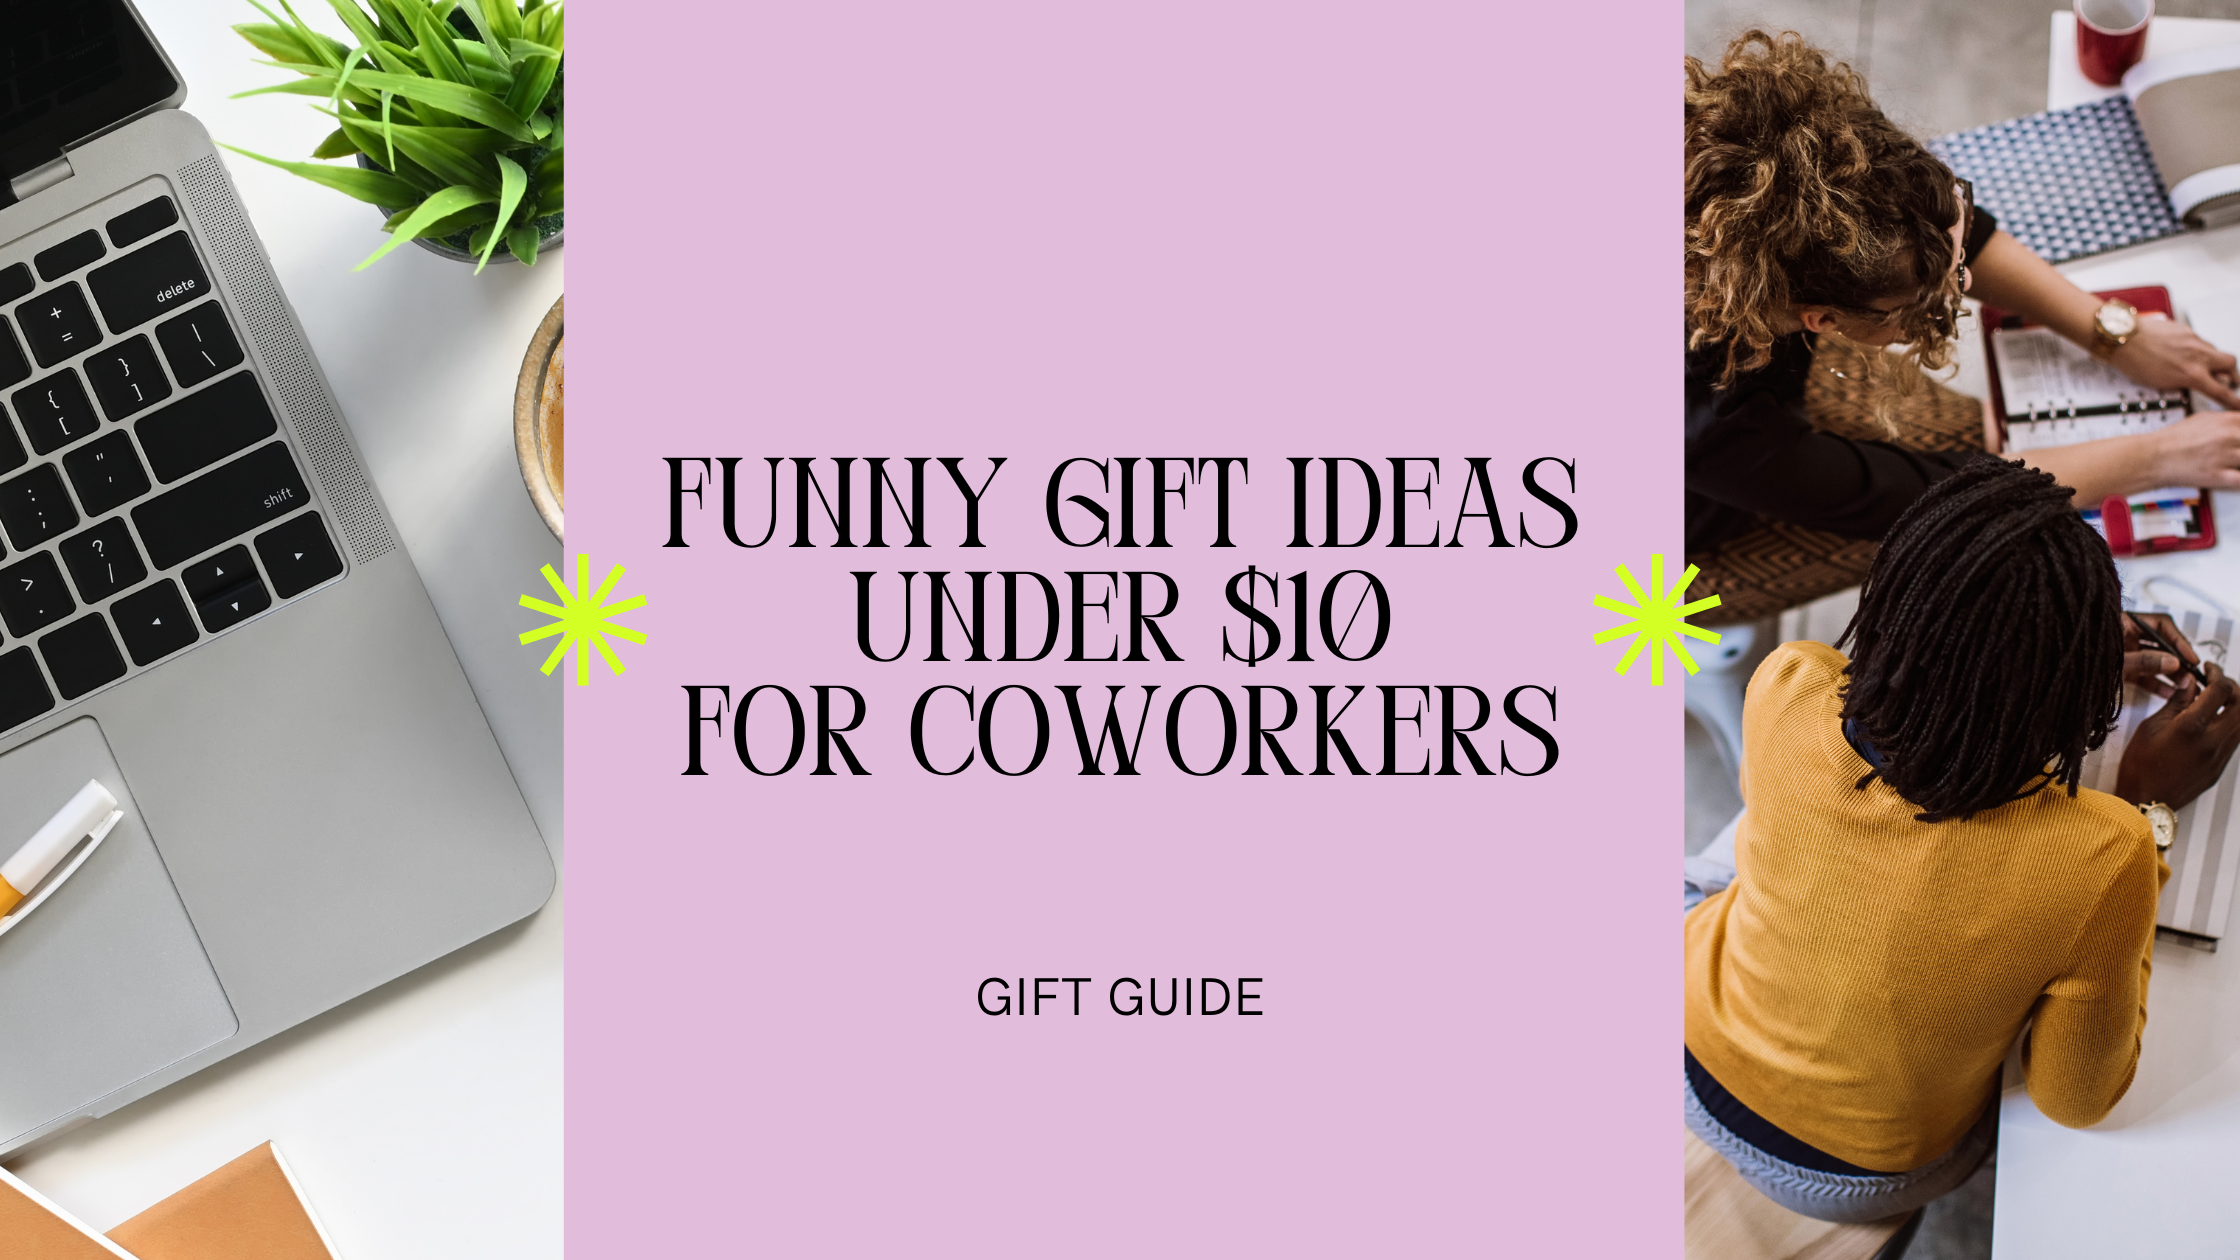 $10 Gift Ideas for Coworkers: 5 Funny and Snarky Gifts for Office Surv